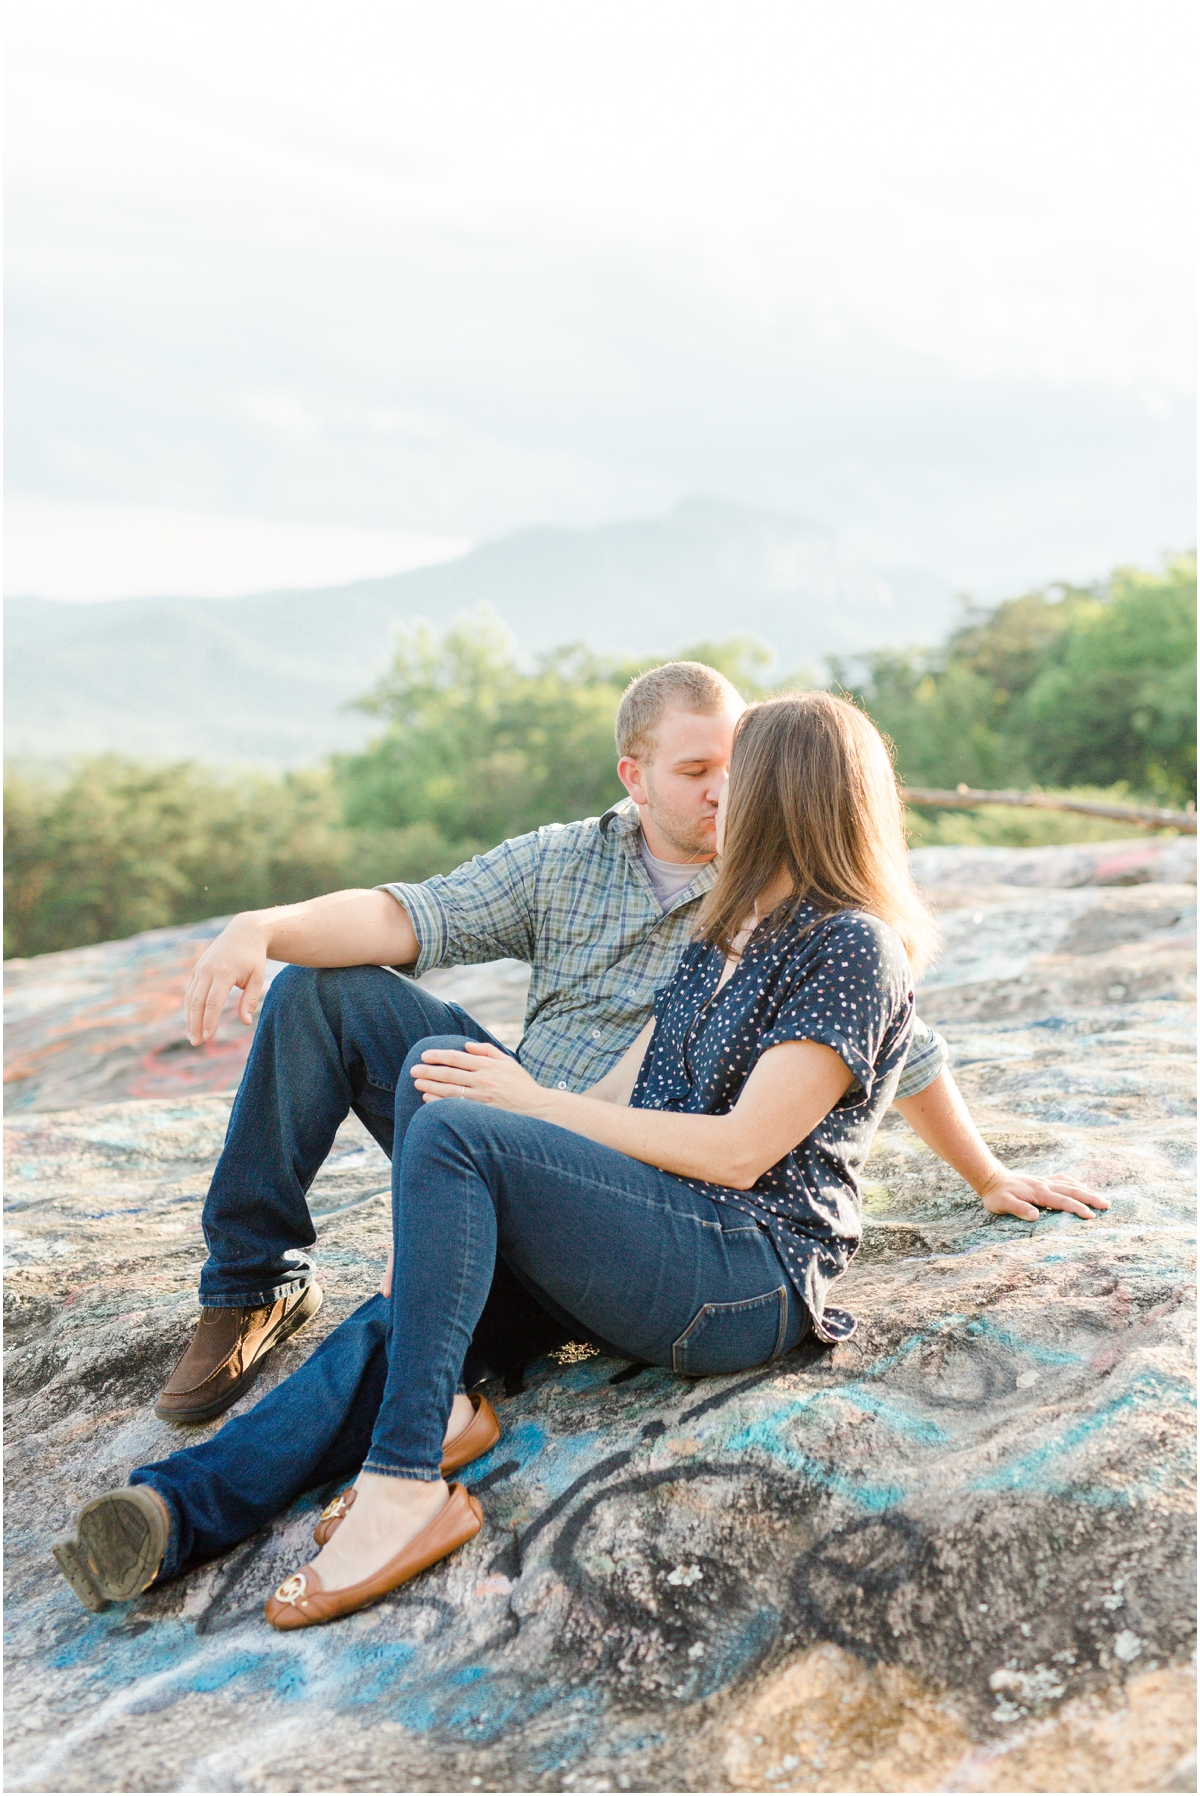 Engagement Session at bald rock & engagement session at table rock field | Greenville Wedding Photographers | Jacqueline & Laura